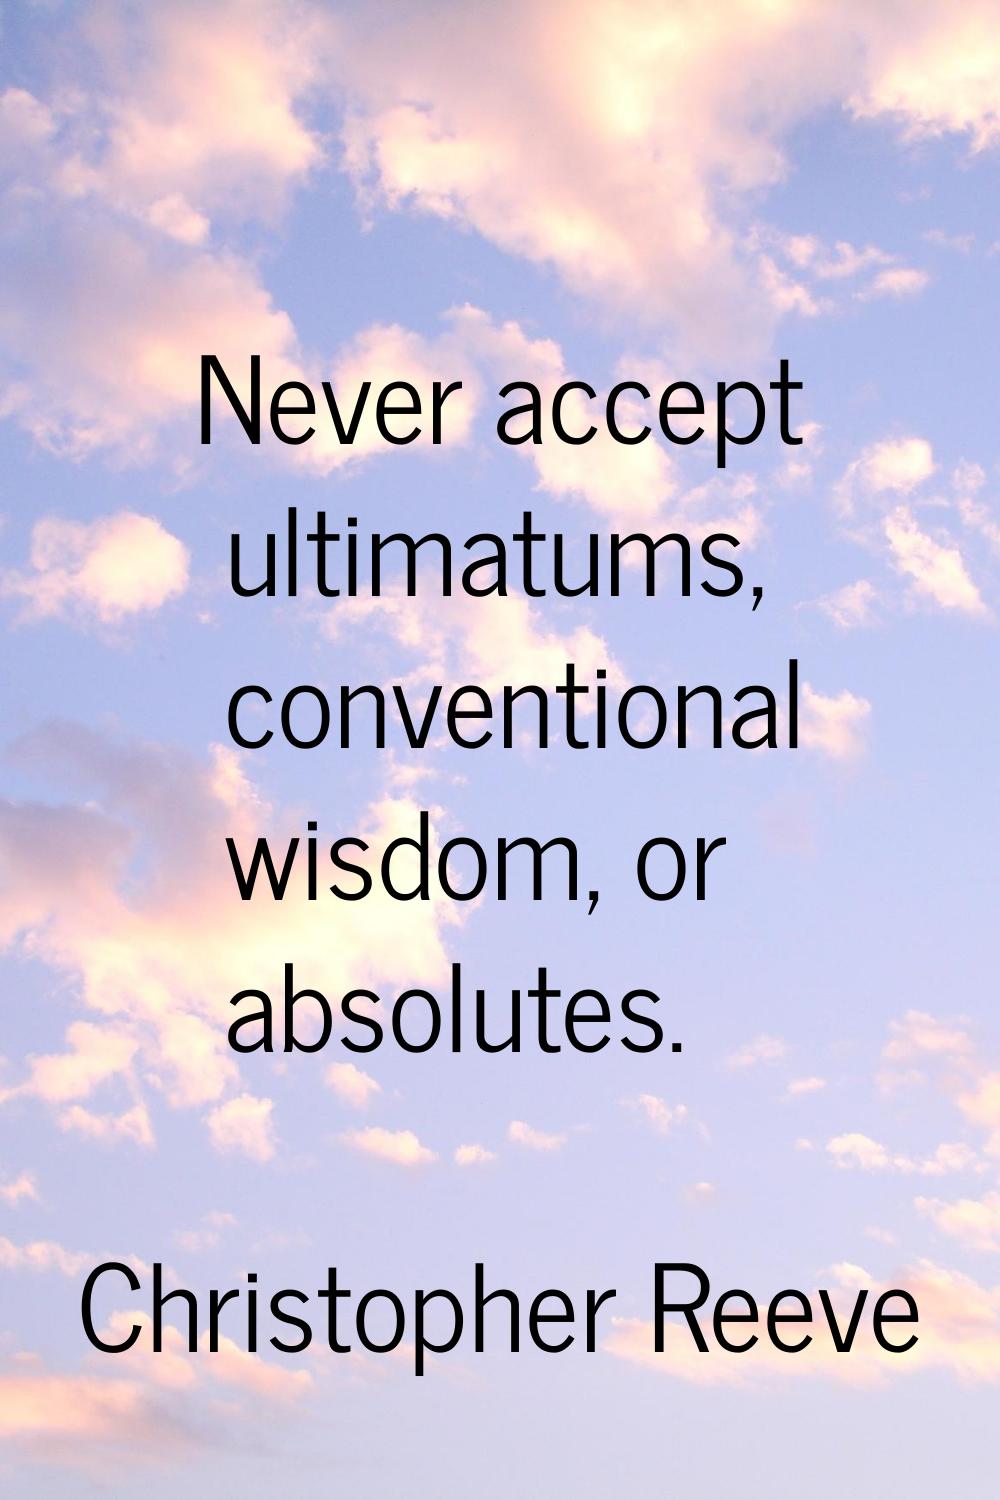 Never accept ultimatums, conventional wisdom, or absolutes.